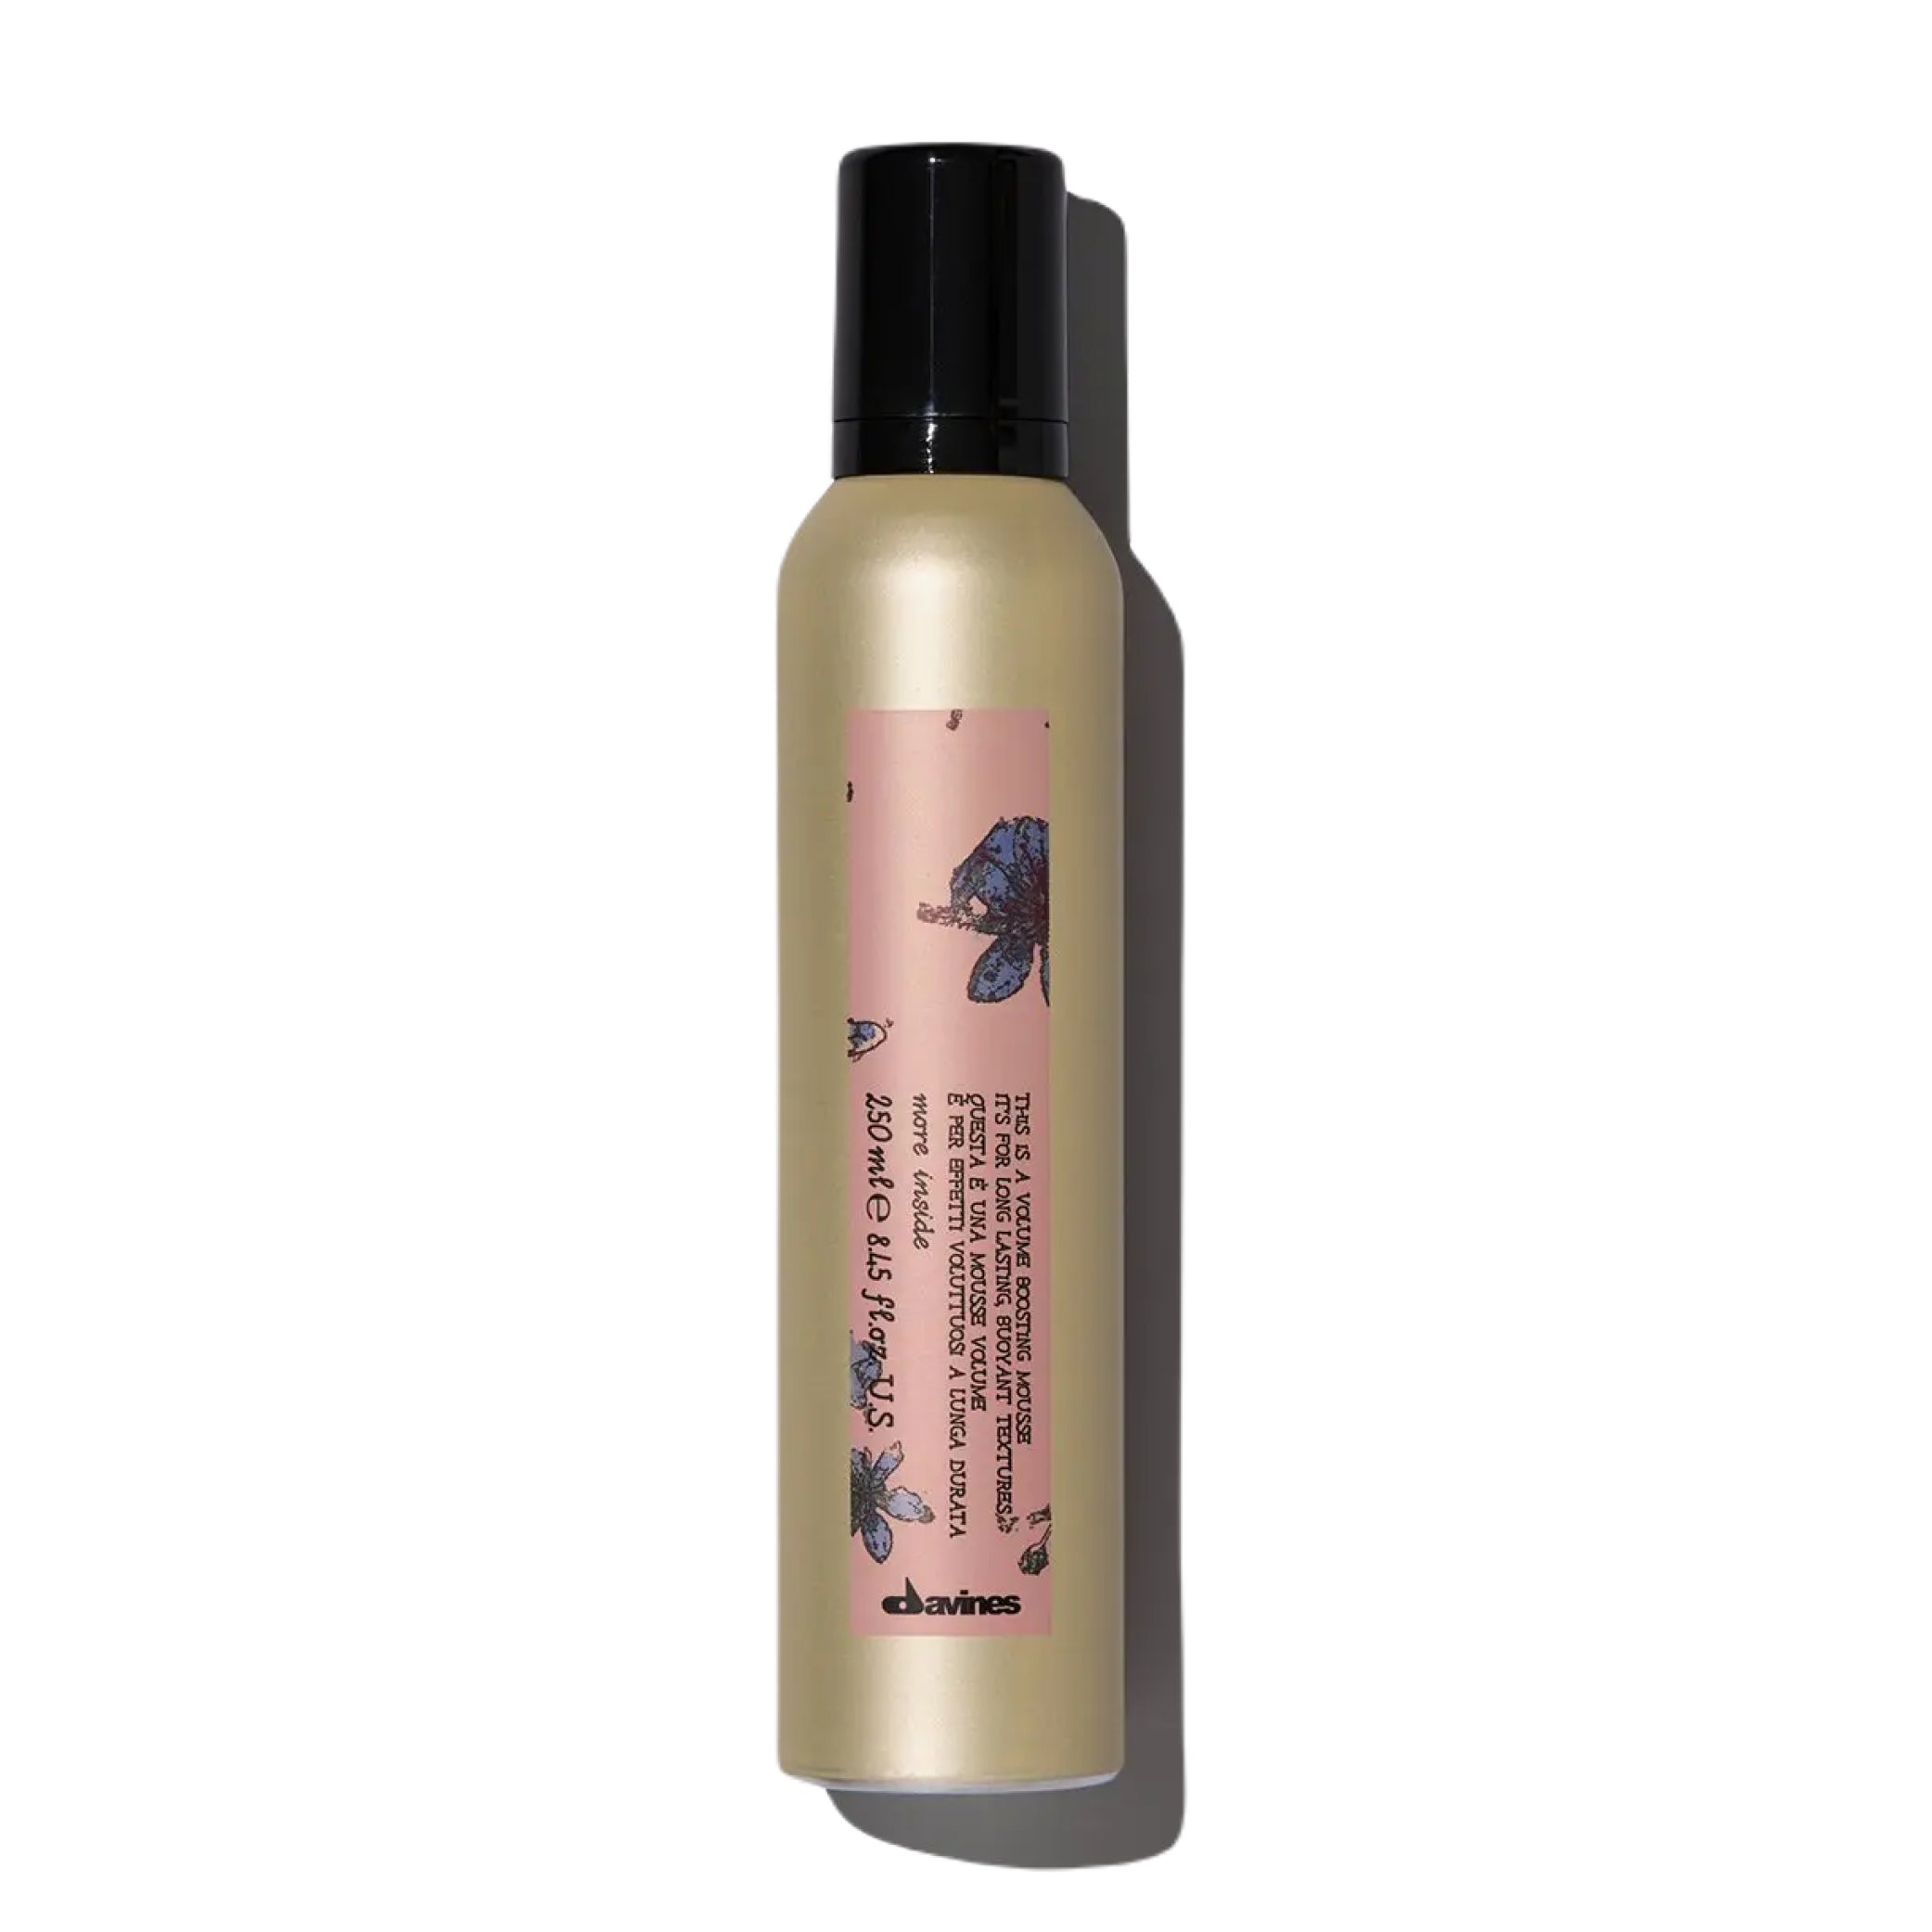 This Is A Volume Boosting Mousse